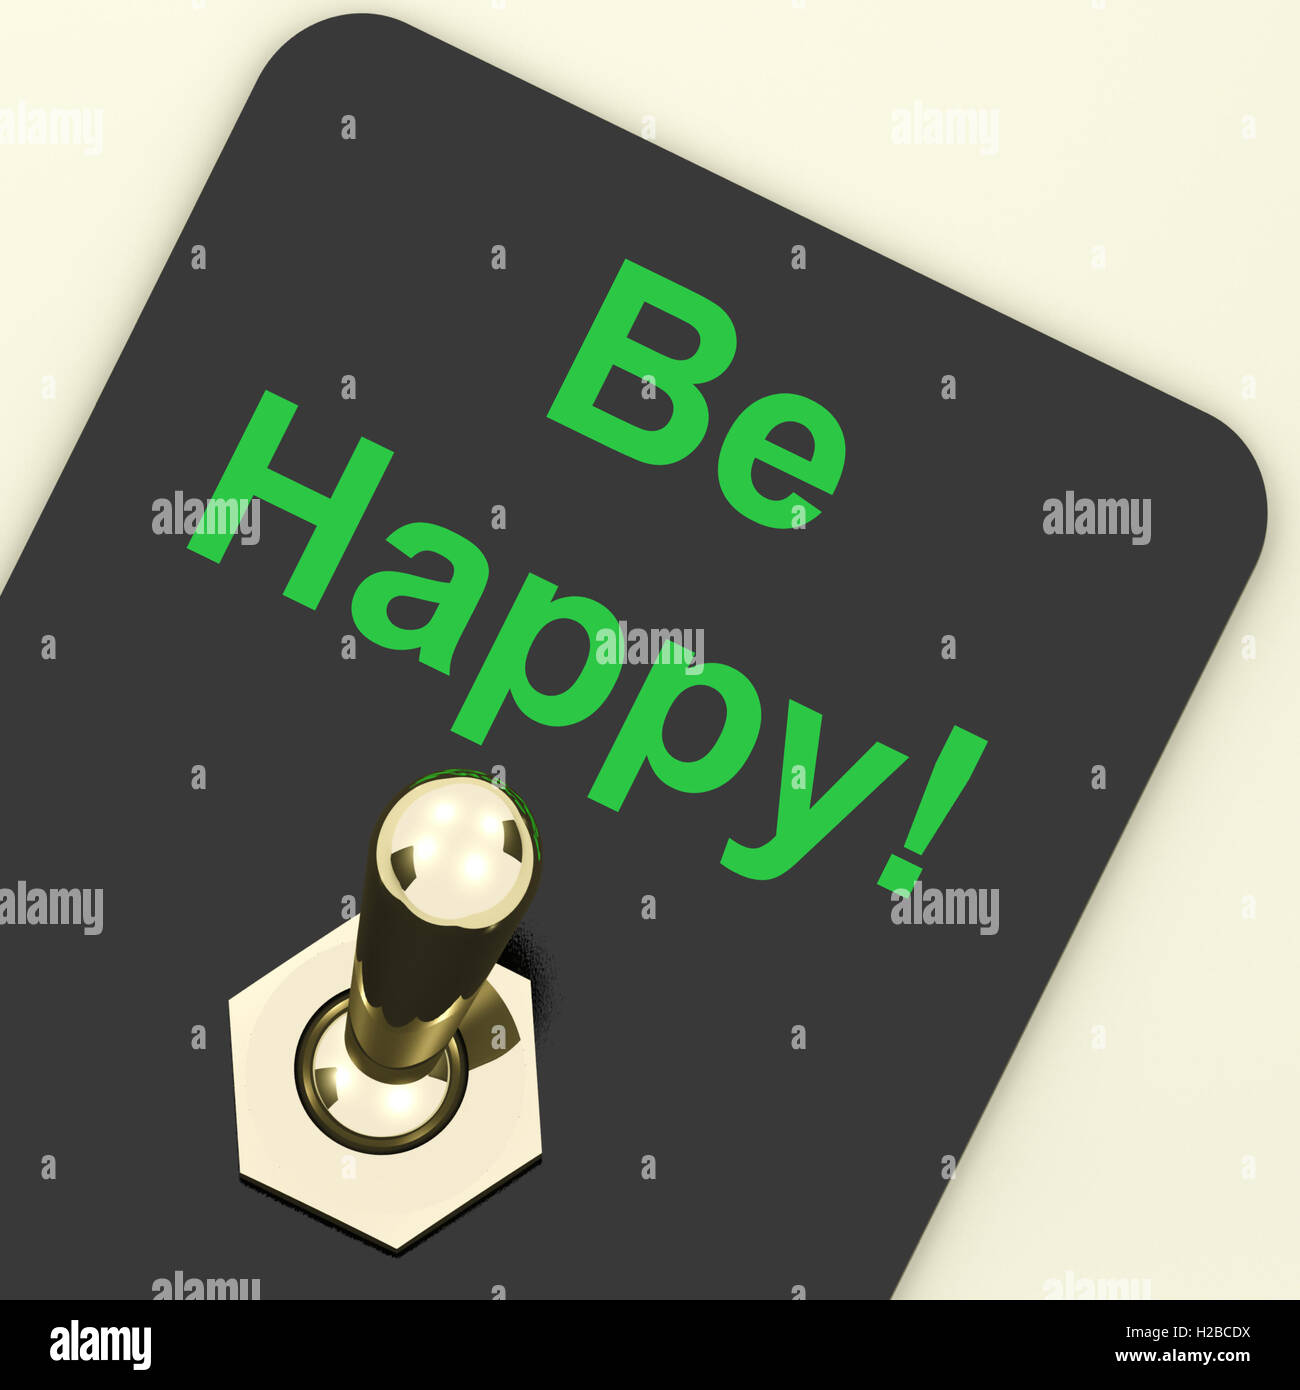 Be Happy Switch Shows Happiness Or Enjoyment Stock Photo